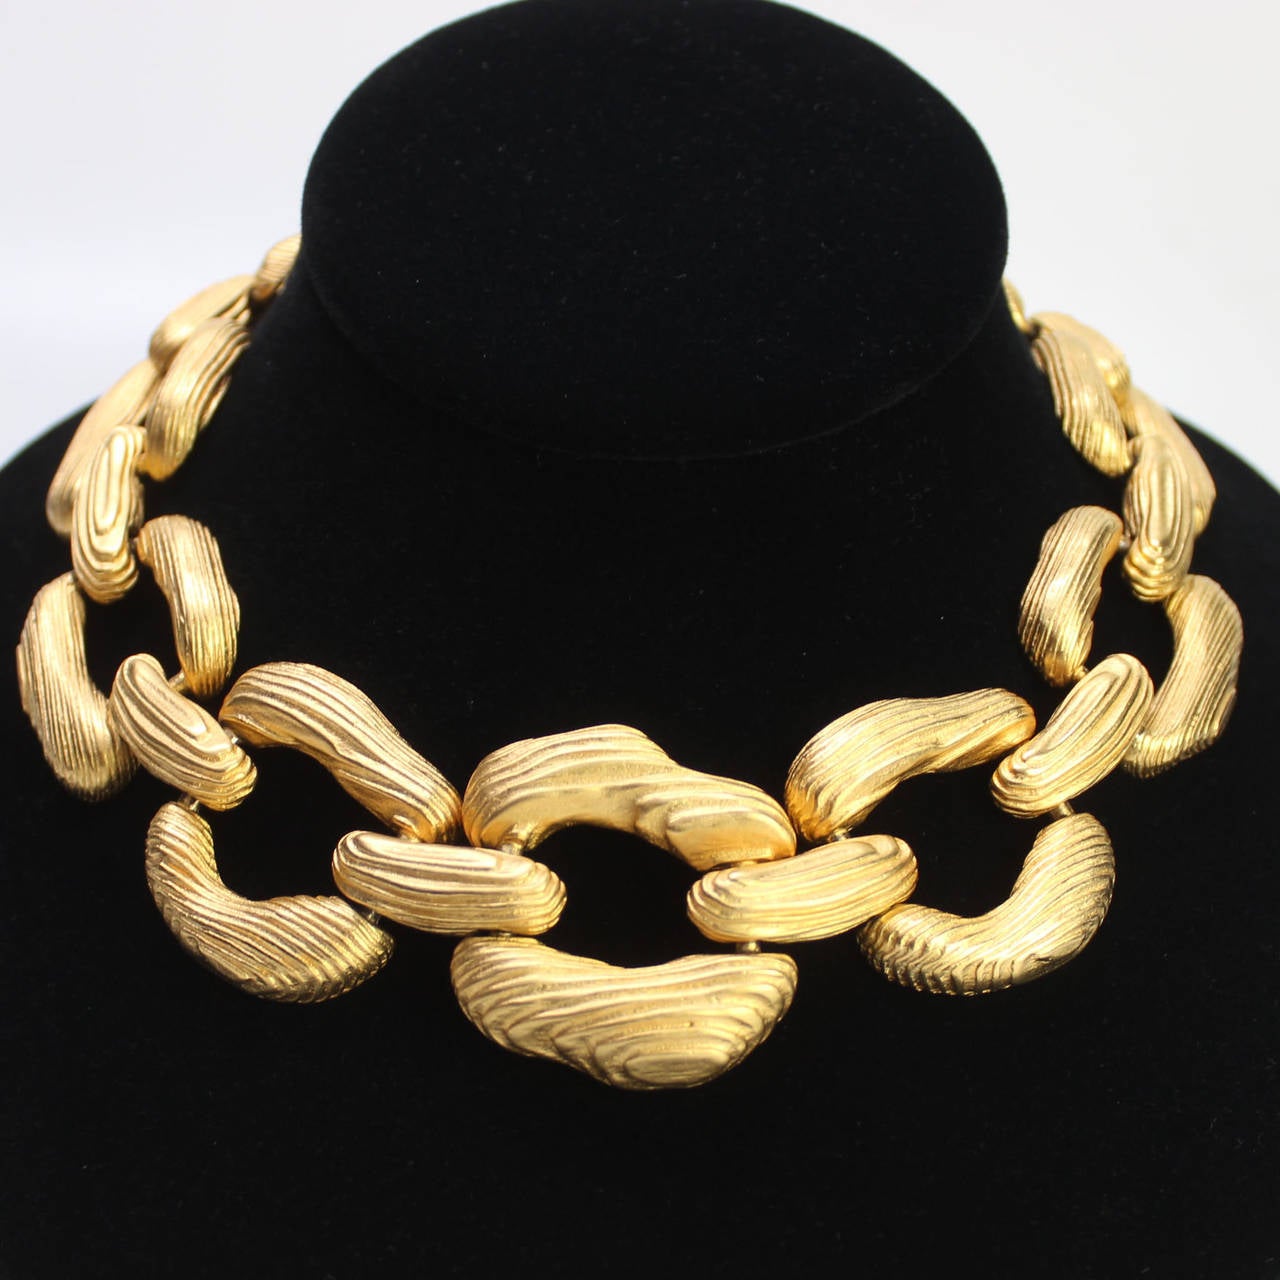 This handsome Givenchy necklace makes a bold statement.  It has an interesting wood grain texture fabricated in a sumptuous gold gilt metal.  It's the perfect bold accessory to make any outfit a hit!